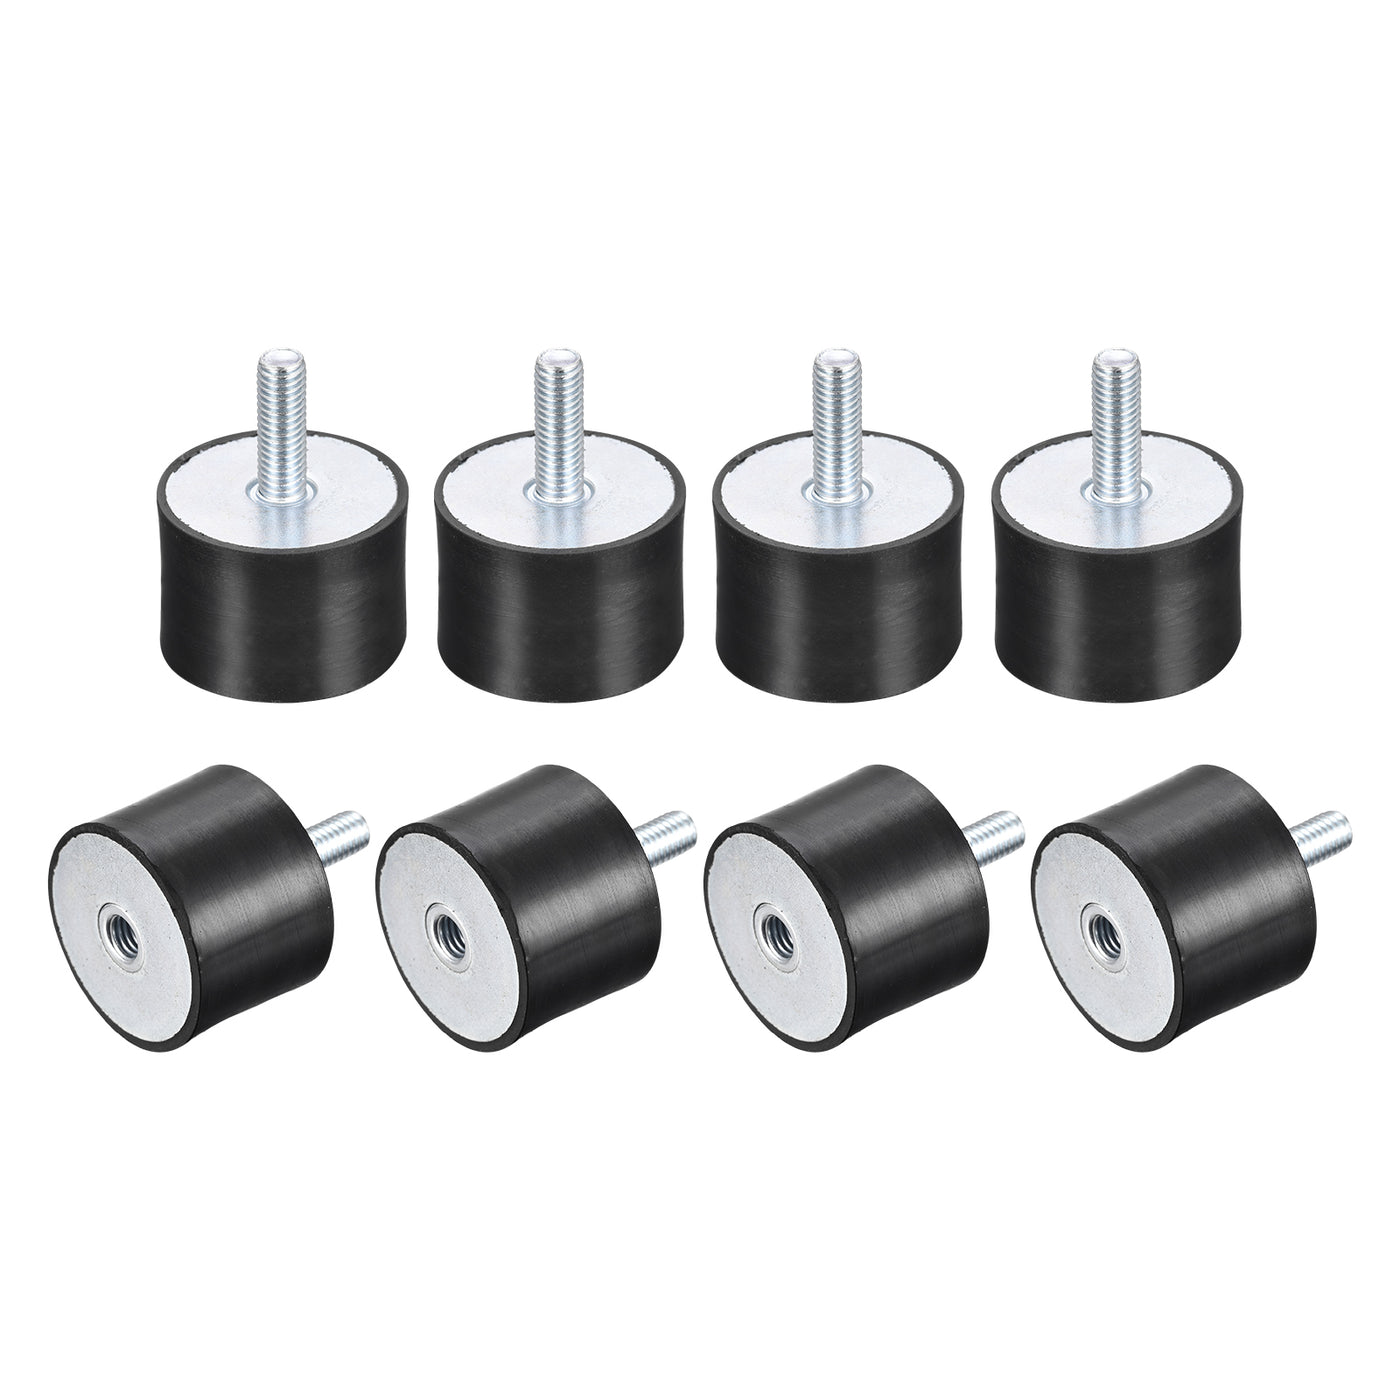 uxcell Uxcell Rubber Mount 8pcs M8 Male/Female Vibration Isolator Shock Absorber D40mmxH30mm